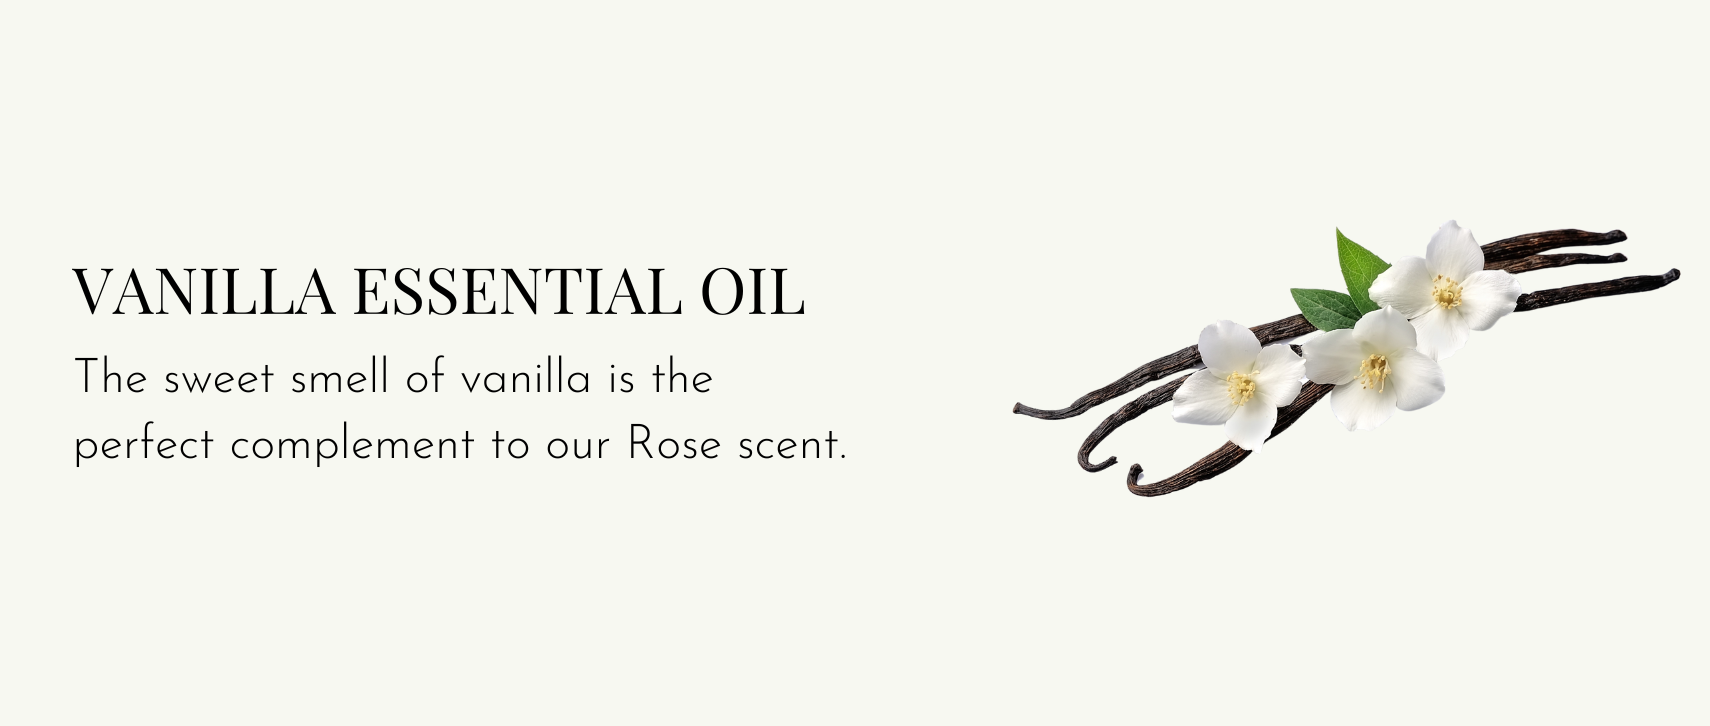 Vanilla Essential Oil – The sweet smell of vanilla is the perfect complement to our Rose scent.